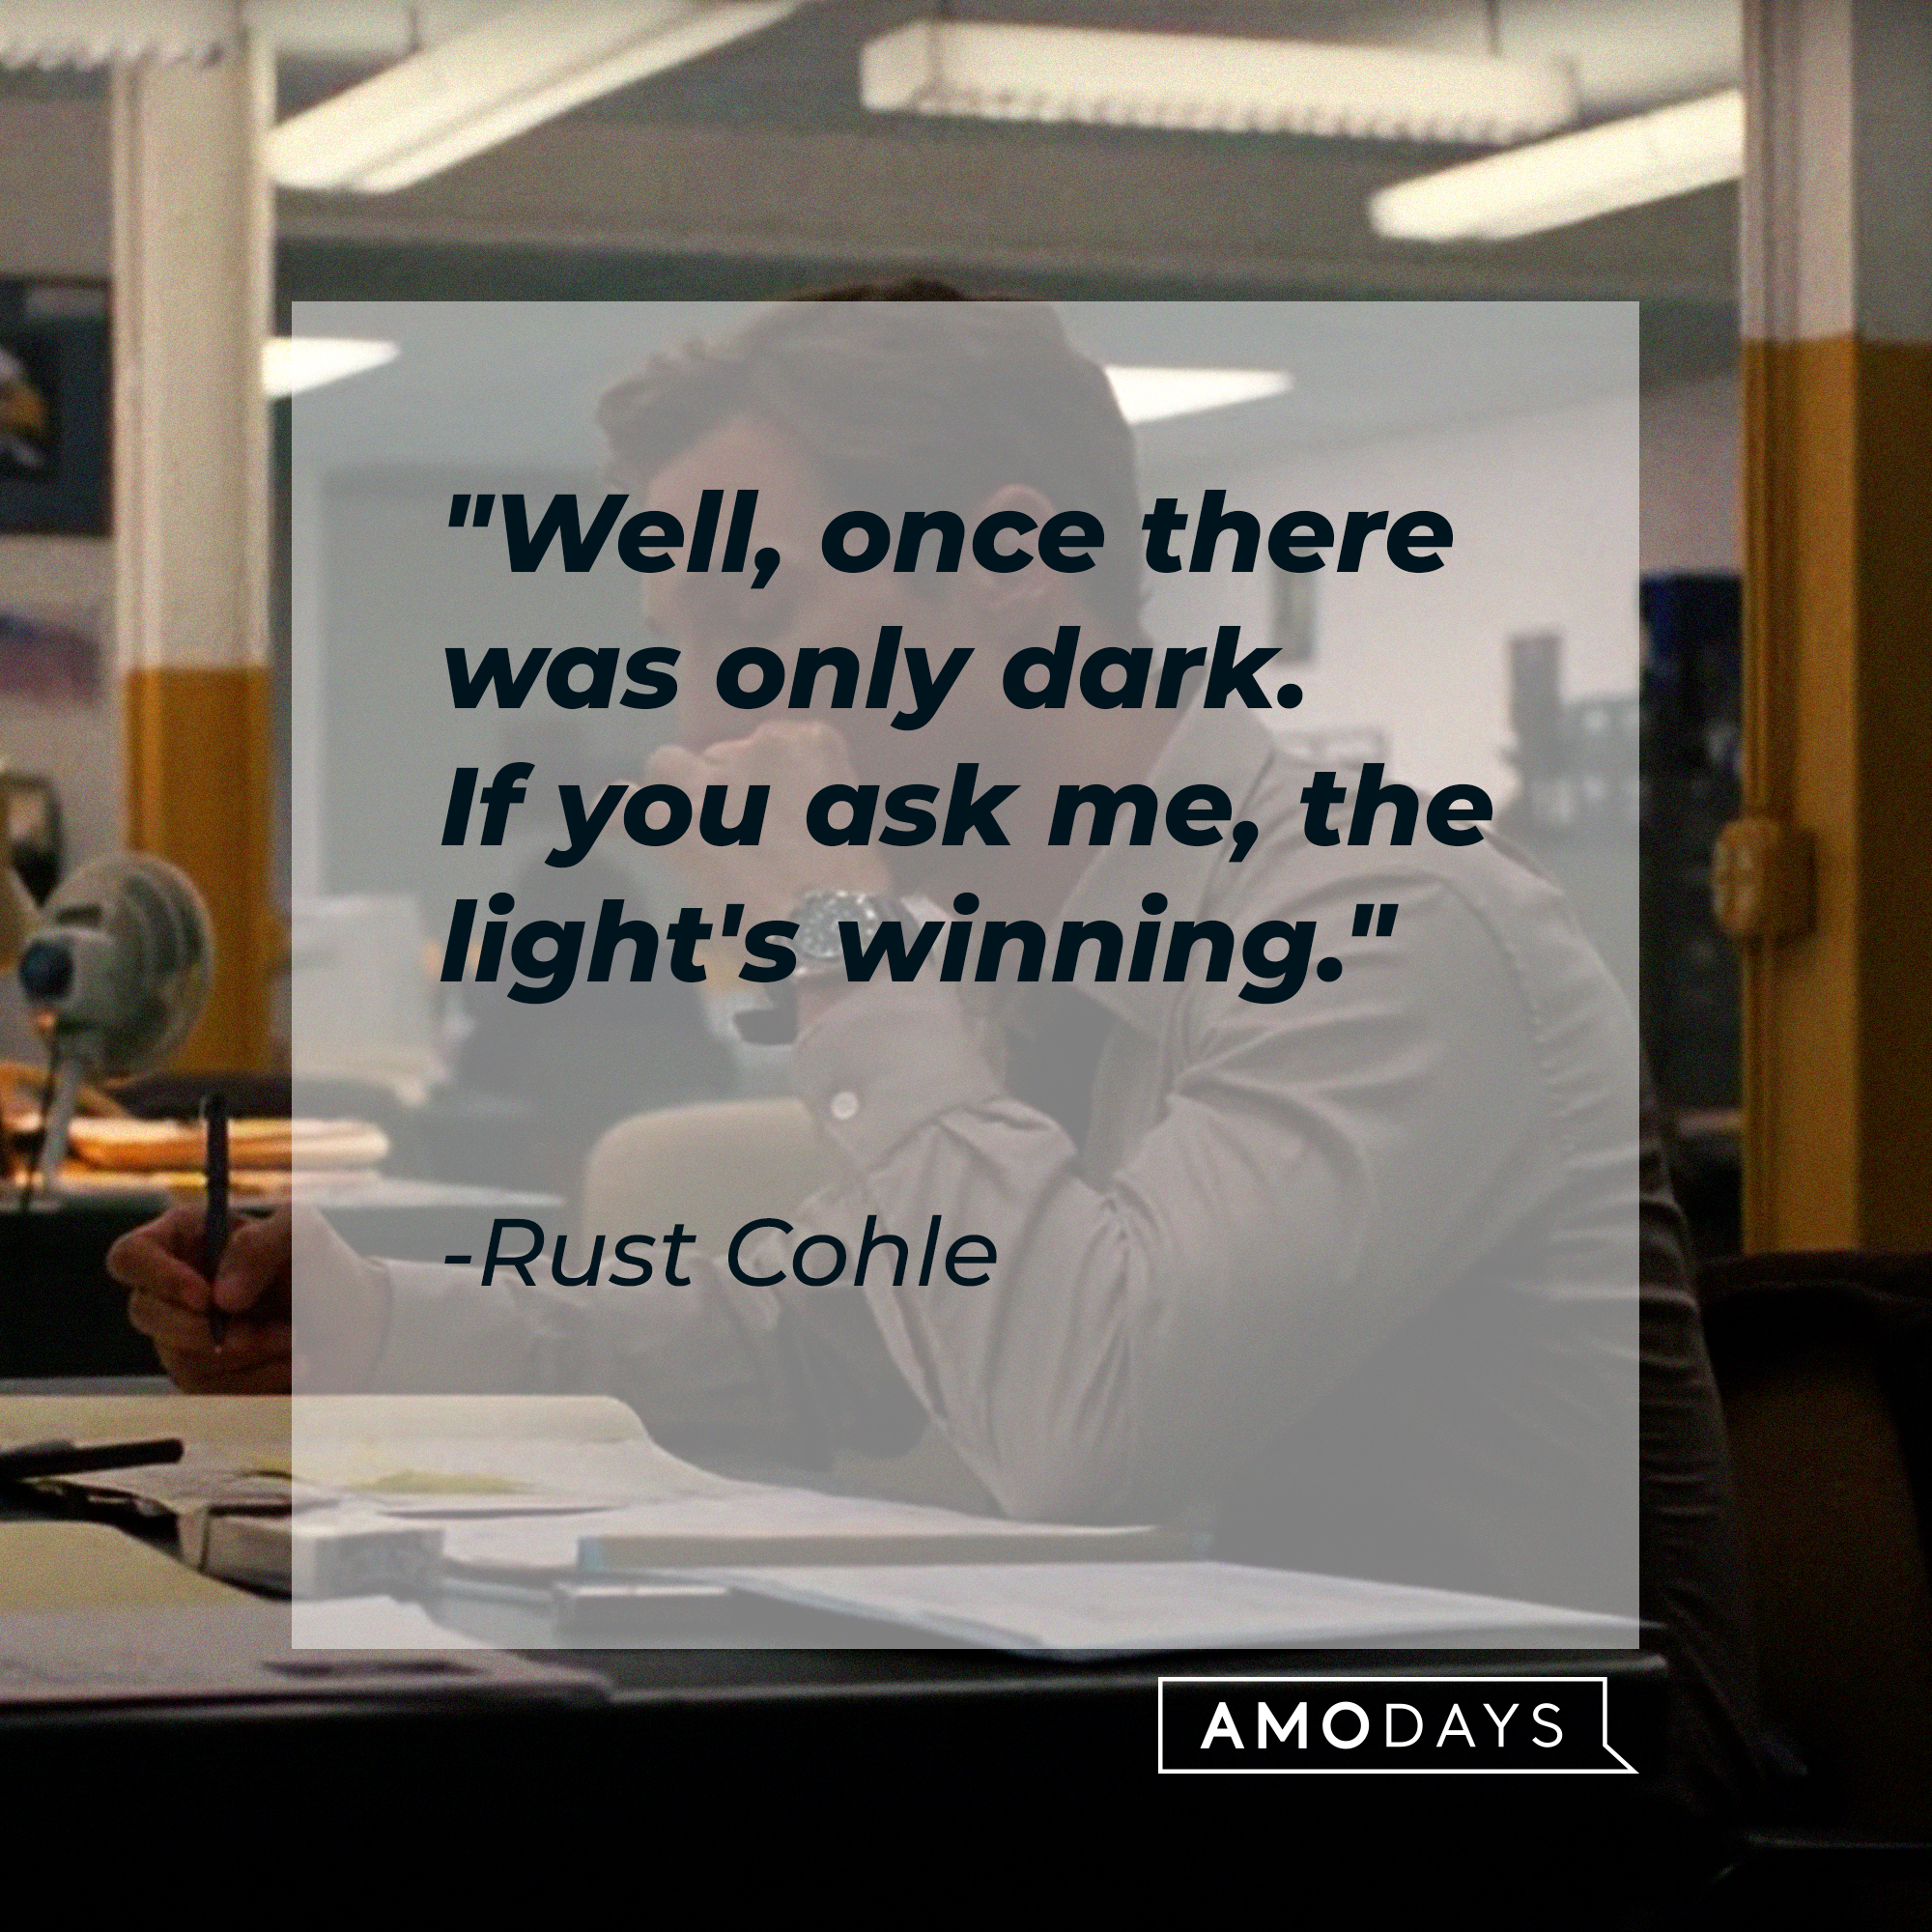 Rust Cohle's quote: "Well, once there was only dark. If you ask me, the light's winning." | Source: facebook.com/TrueDetective